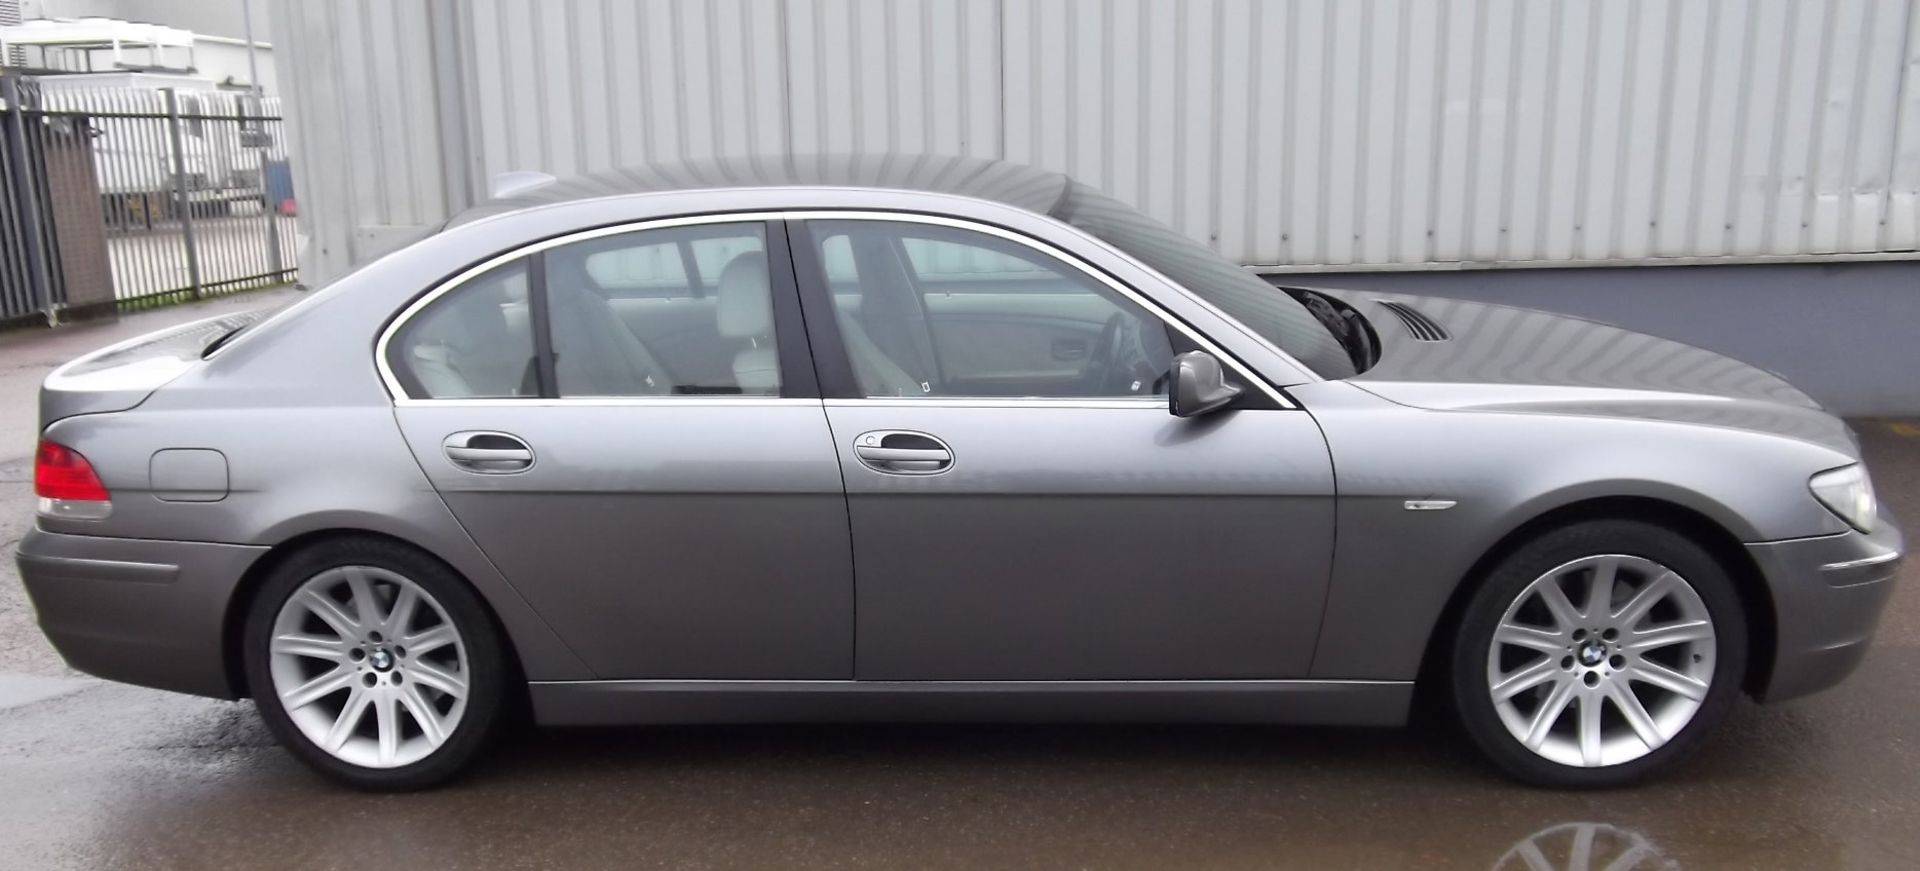 2006 BMW 730D Se Auto 4 Door Saloon - CL505 - NO VAT ON THE HAMMER - Location: Corby, - Image 5 of 25